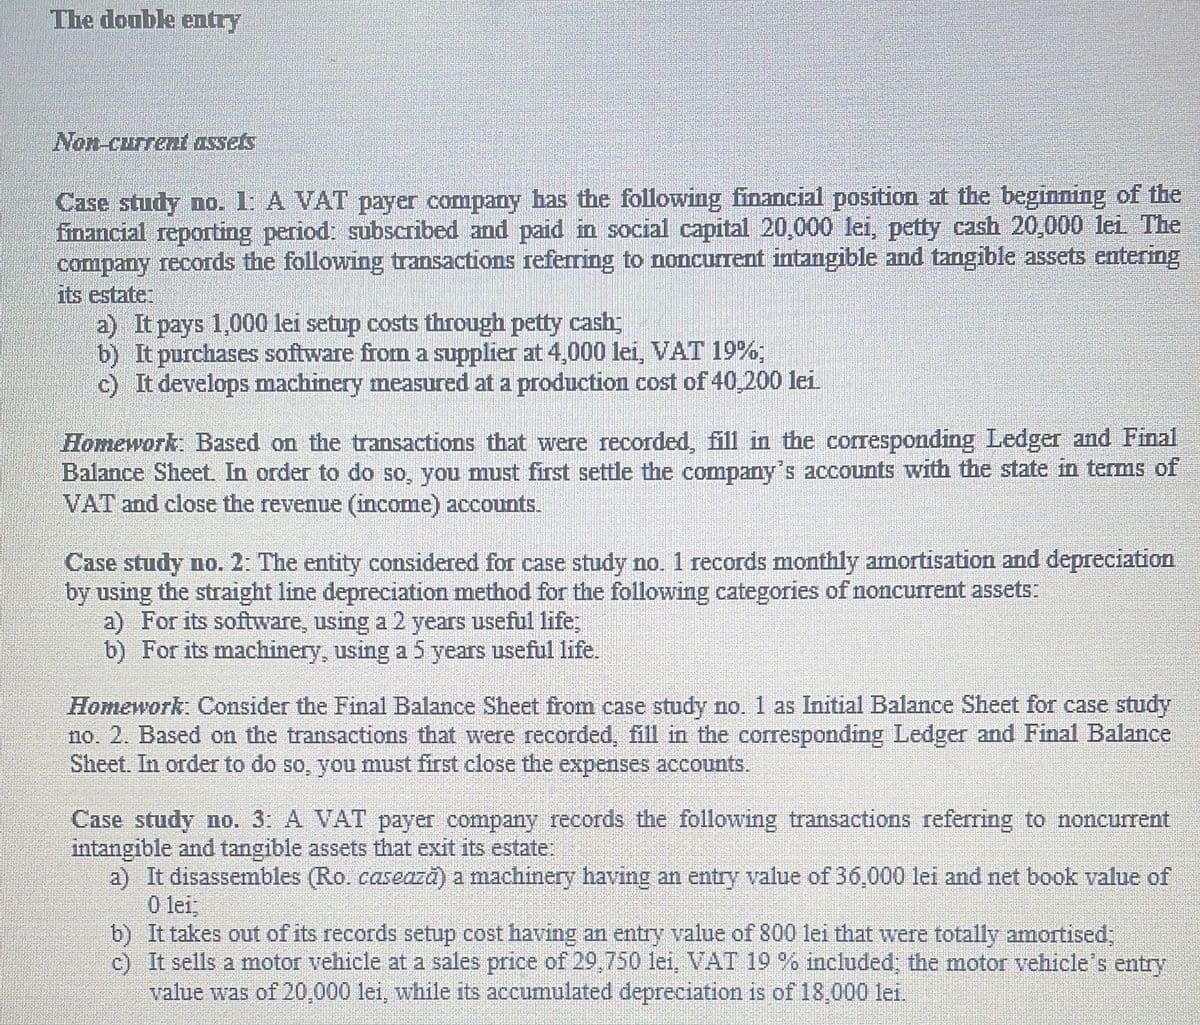 The double entry
Non-current assets
Case study no. 1: A VAT payer company has the following financial position at the beginning of the
financial reporting period: subscribed and paid in social capital 20,000 lei, petty cash 20,000 lei The
company records the following transactions referring to noncurrent intangible and tangible assets entering
its estate:
a) It pays 1,000 lei setup costs through petty cash;
b) It purchases software from a supplier at 4,000 lei, VAT 19%
c) It develops machinery measured at a production cost of 40,200 lei
Homework: Based on the transactions that were recorded, fill in the corresponding Ledger and Final
Balance Sheet. In order to do so, you must first settle the company's accounts with the state in terms of
VAT and close the revenue (income) accounts.
Case study no. 2: The entity considered for case study no. 1 records monthly amortisation and depreciation
by using the straight line depreciation method for the following categories of noncurrent assets:
a) For its software, using a 2 years useful life;
b) For its machinery, using a 5 years useful life.
Homework: Consider the Final Balance Sheet from case study no. 1 as Initial Balance Sheet for case study
no. 2. Based on the transactions that were recorded, fill in the corresponding Ledger and Final Balance
Sheet. In order to do so, you must first close the expenses accounts.
Case study no. 3: A VAT payer company records the following transactions referring to noncurrent
intangible and tangible assets that exit its estate:
a) It disassembles (Ro. casează) a machinery having an entry value of 36,000 lei and net book value of
0 lei,
b) It takes out of its records setup cost having an entry value of 800 lei that were totally amortised,
c) It sells a motor vehicle at a sales price of 29,750 lei, VAT 19 % included; the motor vehicle's entry
value was of 20,000 lei, while its accumulated depreciation is of 18,000 lei.
